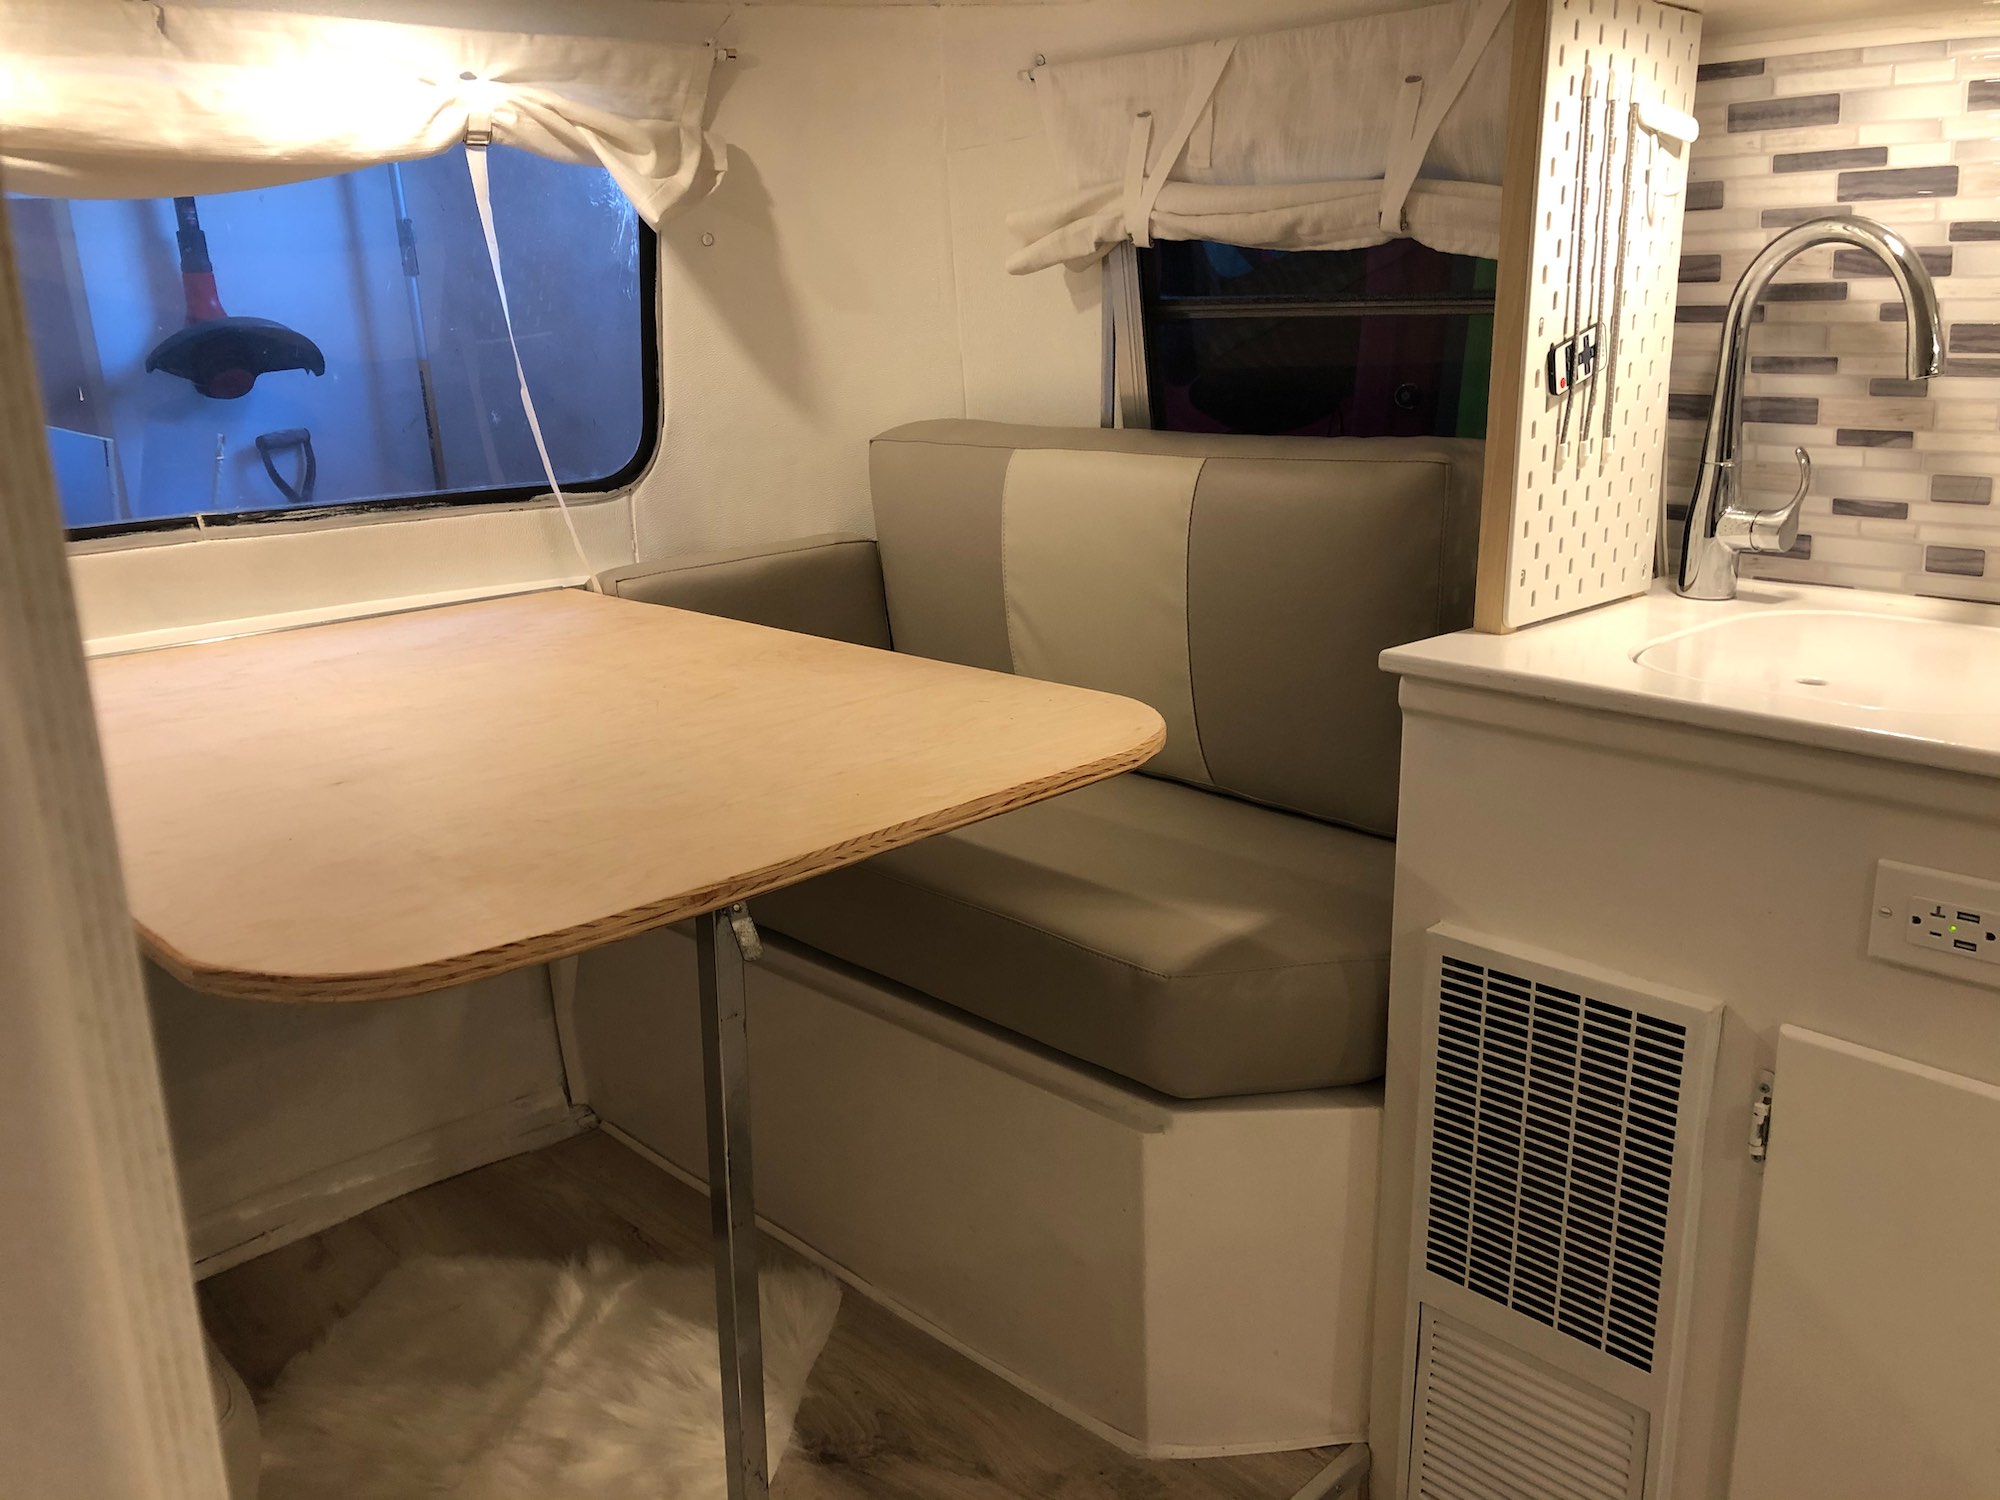 I don't have an industrial sewing machine or any real upholstery skills, so I figured it was smart to farm out the actual upholstery work. We had the cushions covered in a nice high-quality marine vinyl in a sort of two-tone gray/beige color.  We deliberately kept the colors very neutral and cold. The camper is so small that even a single pillow introduces a lot of color. I made the dinette table, too. Then later I made another one, 'cause I didn't like this one.